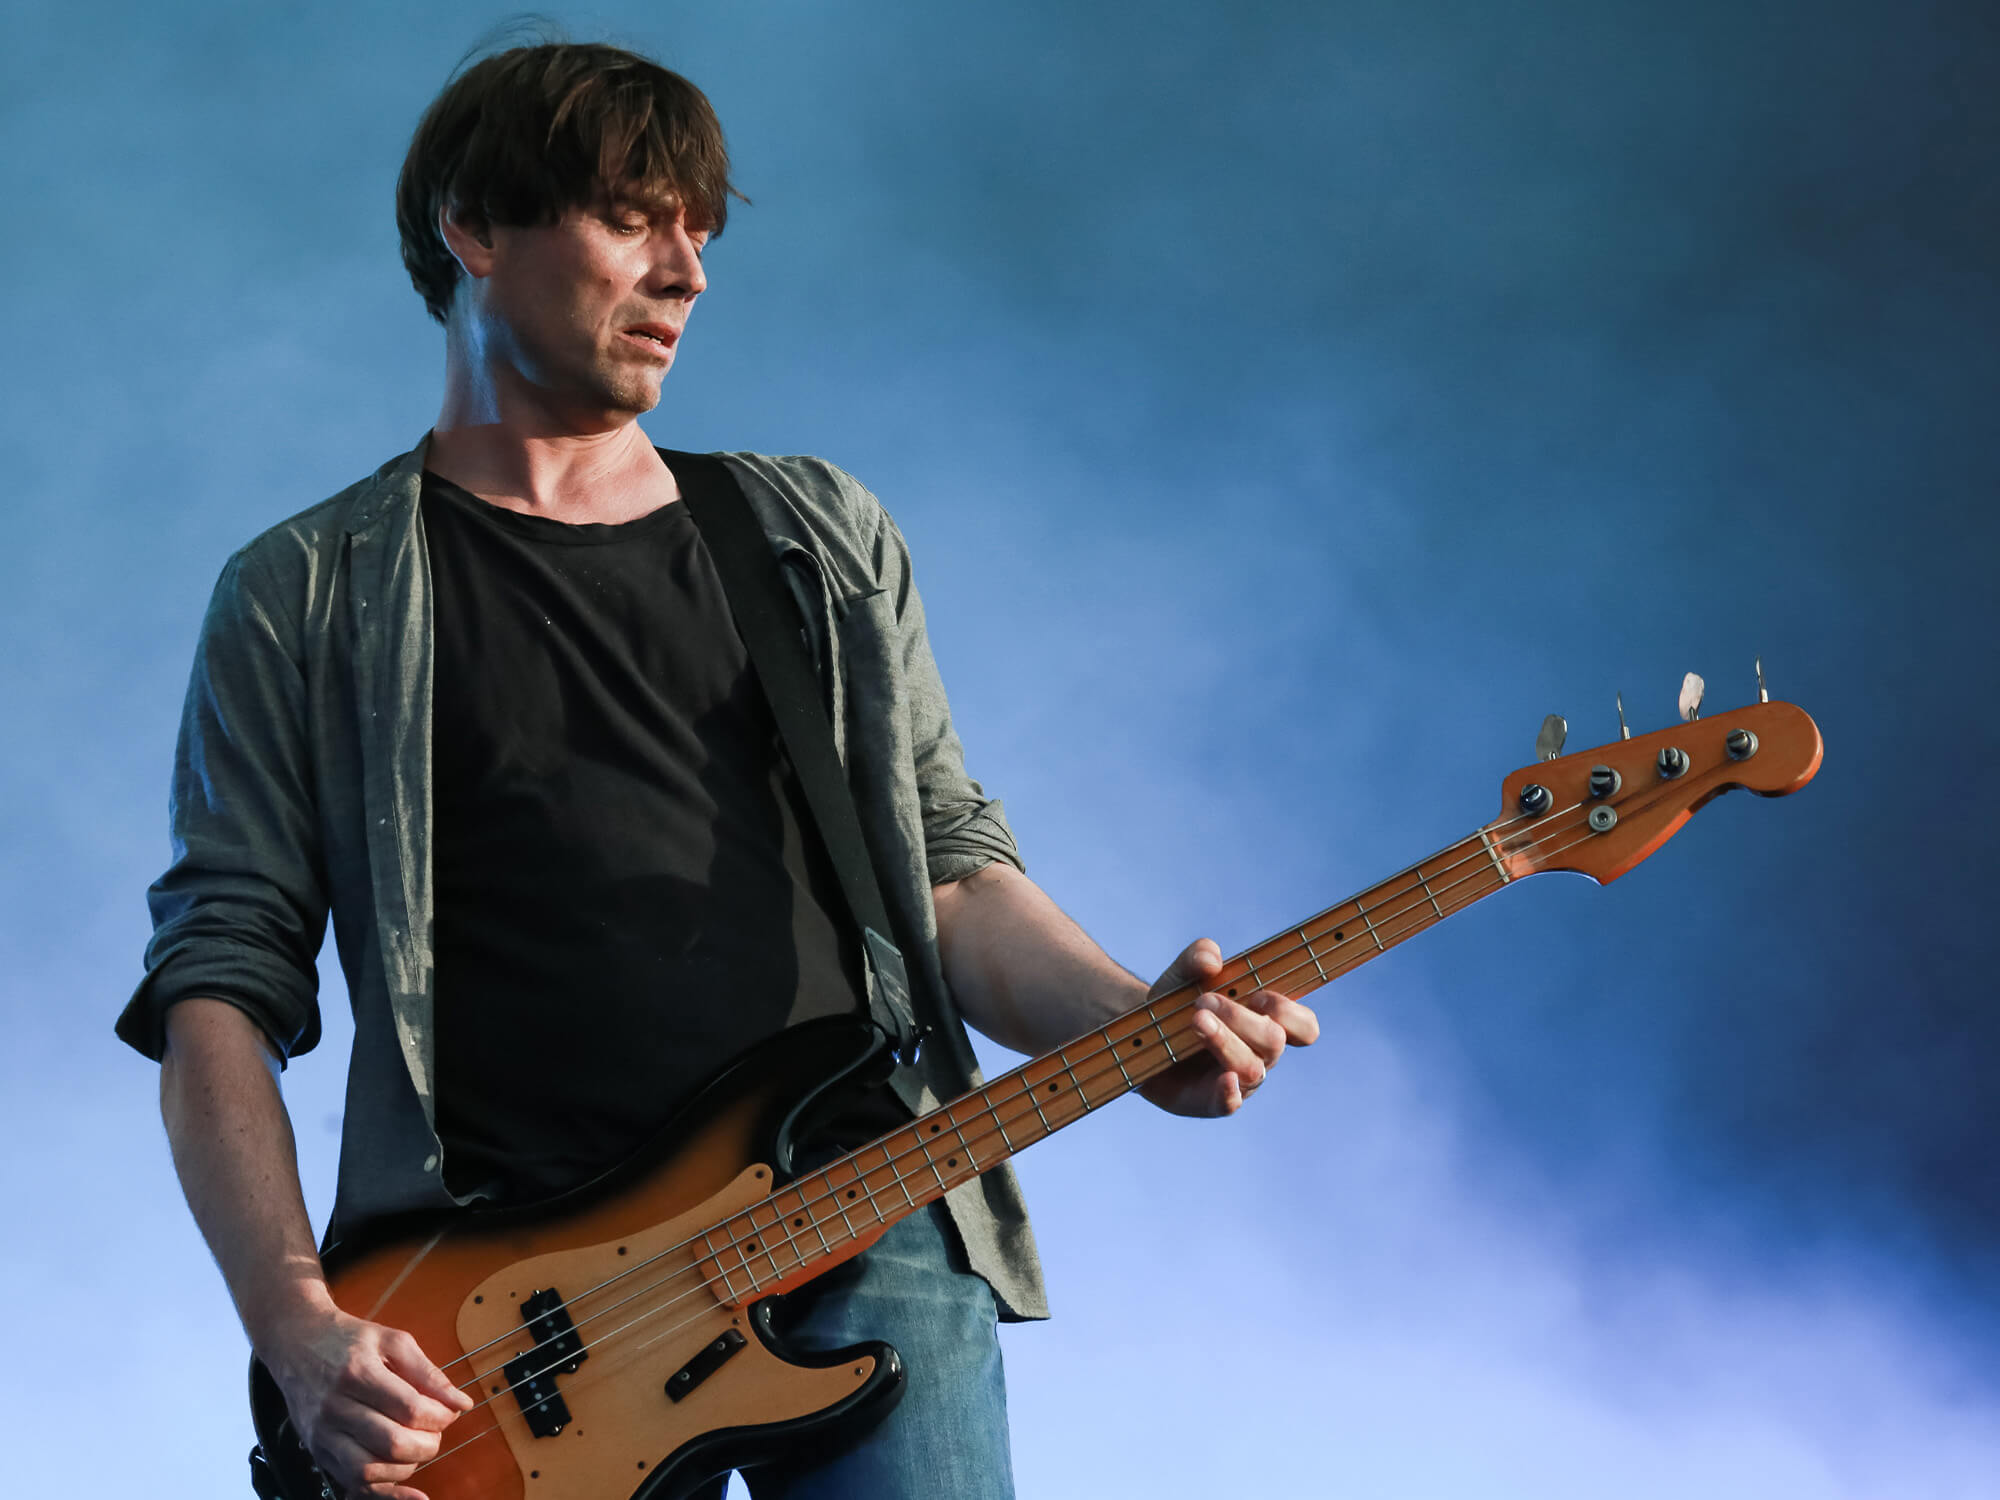 Alex James with his bass on stage in 2015